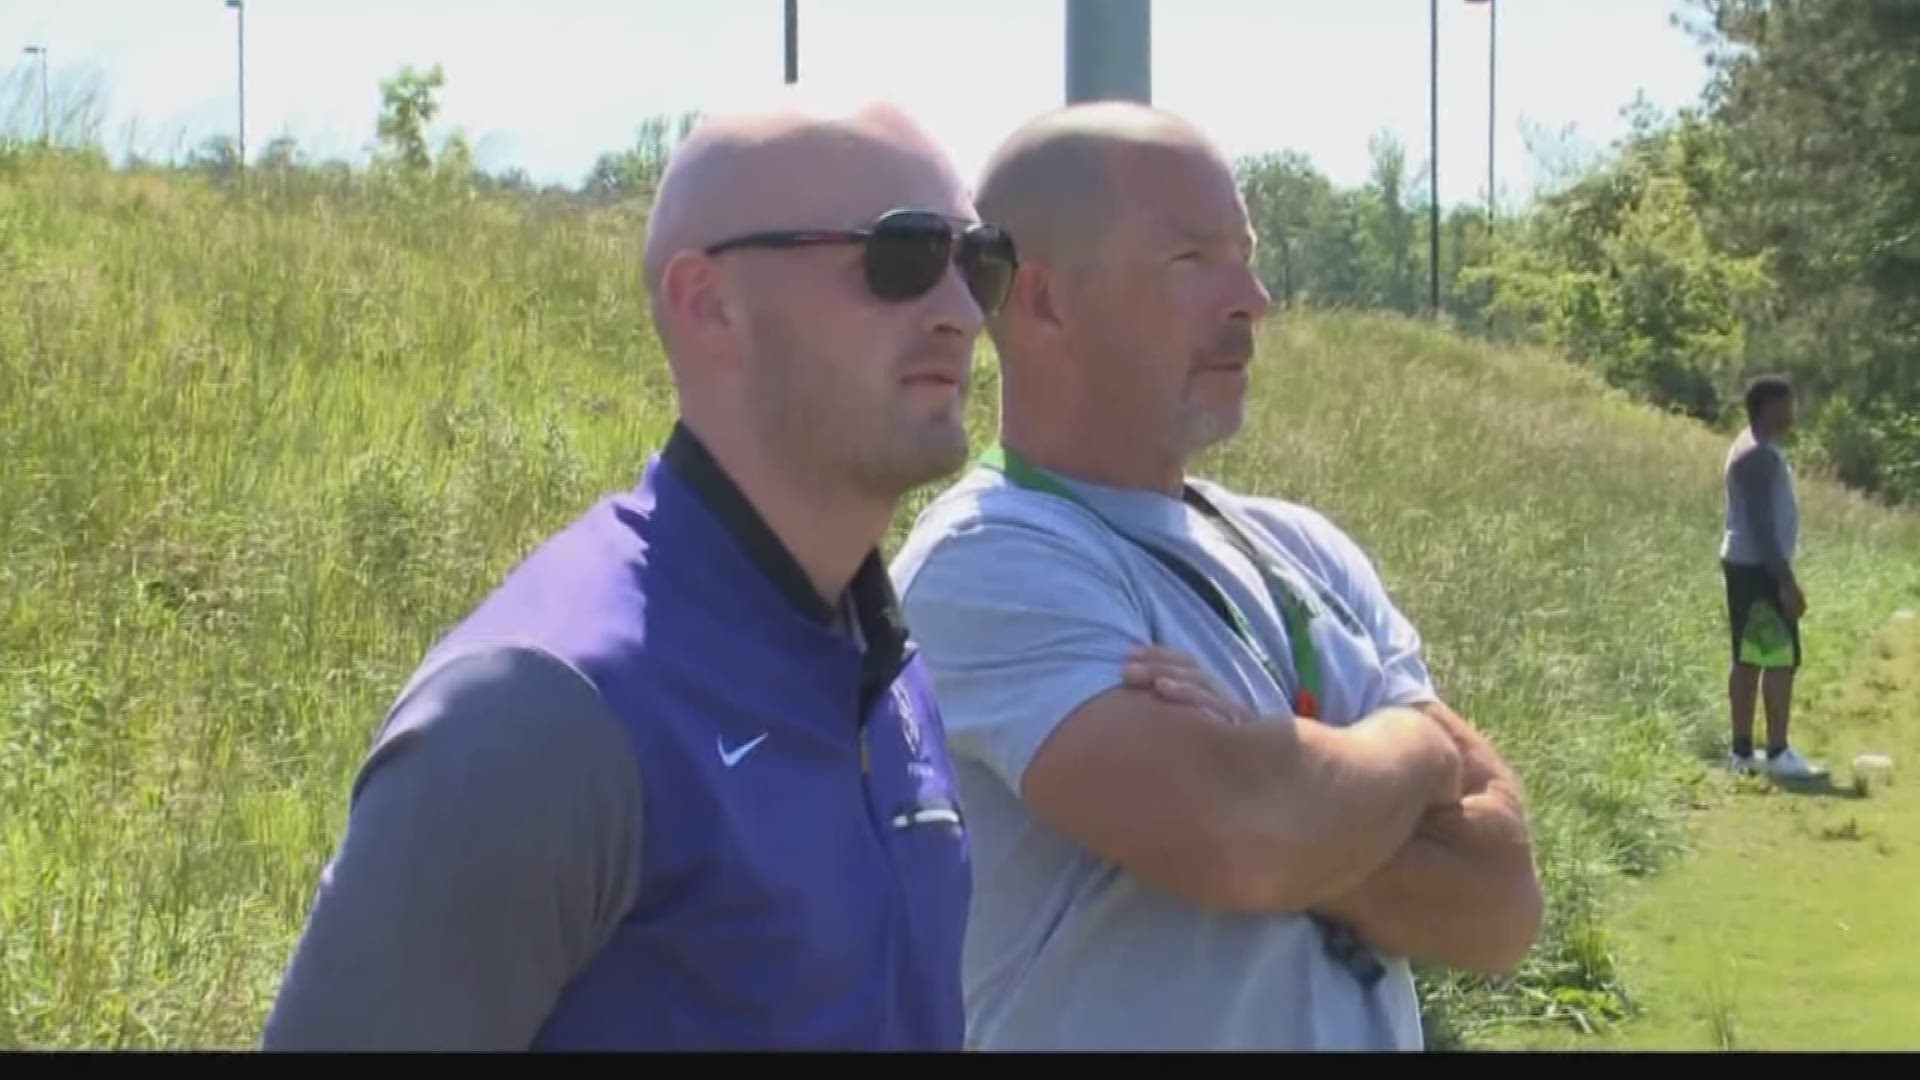 Former USC and NFL quarterback Connor Shaw recently wrapped up his first spring as a college coach. The Furman tight ends coach was at Dutch Fork High School Tuesday to check out the Silver Foxes who opened up spring drills.